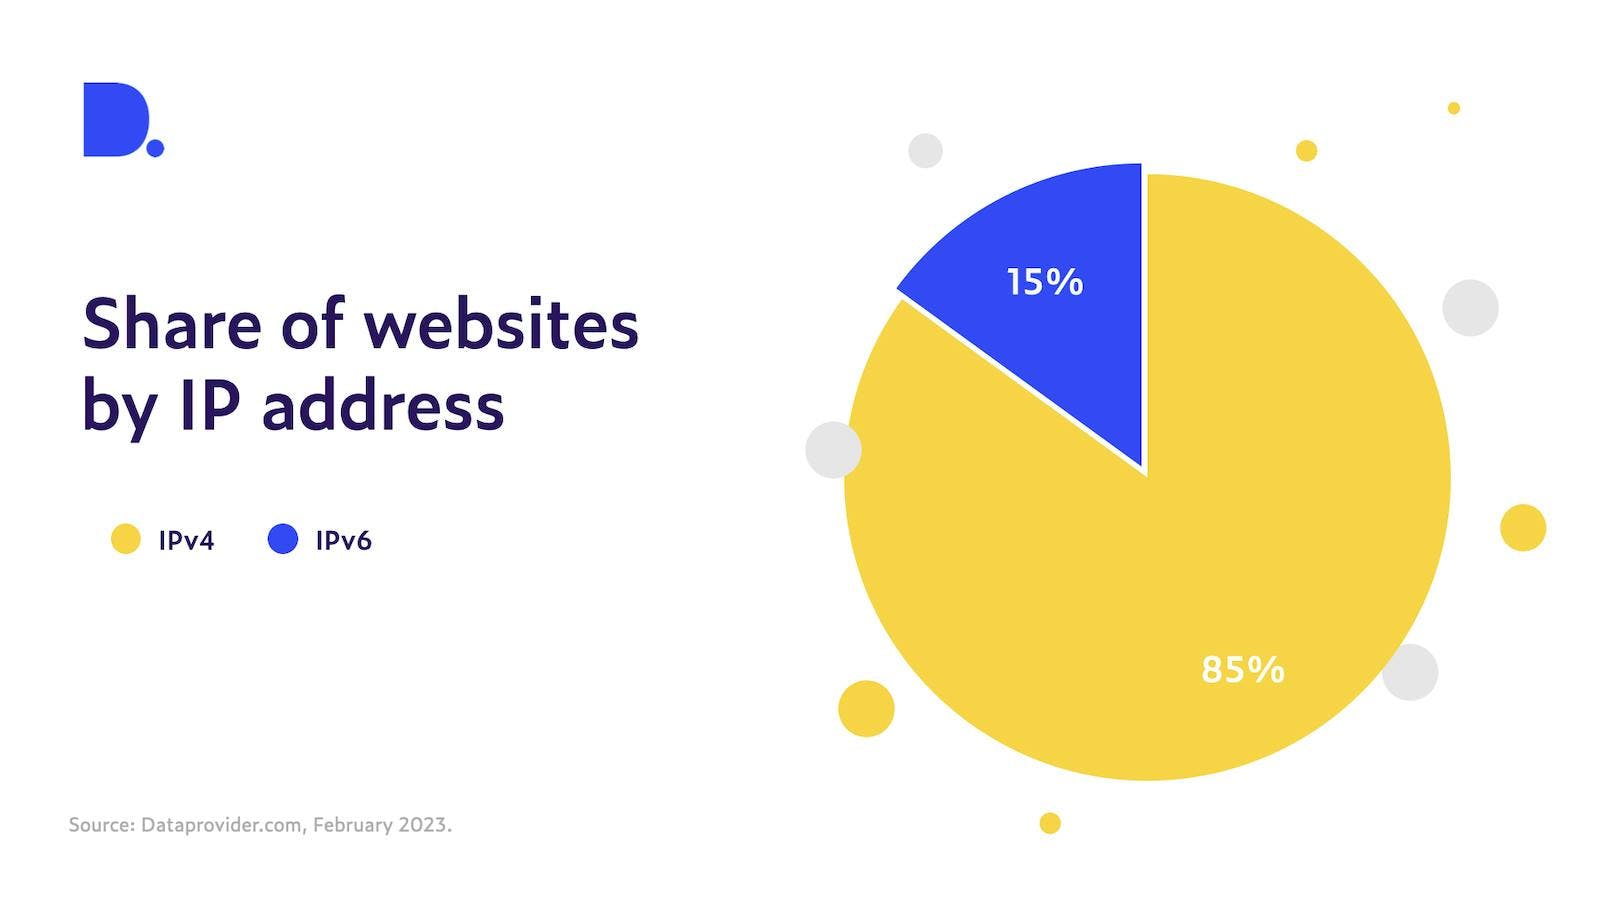 Figure 1: Share of websites by IP address version